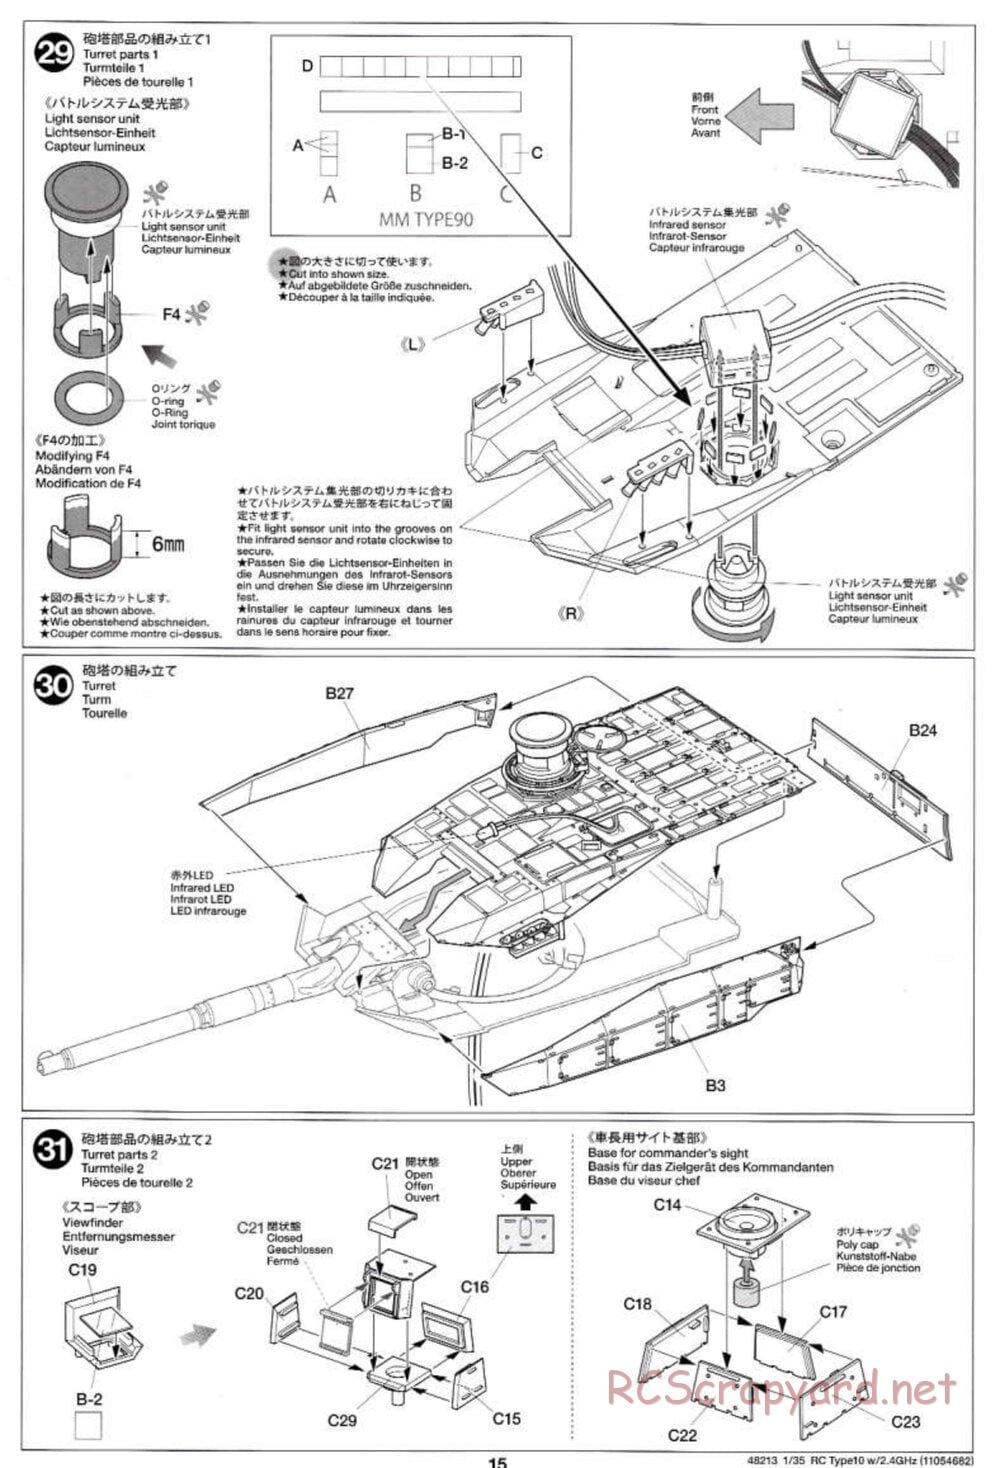 Tamiya - JGSDF Type 10 Tank - 1/35 Scale Chassis - Manual - Page 15